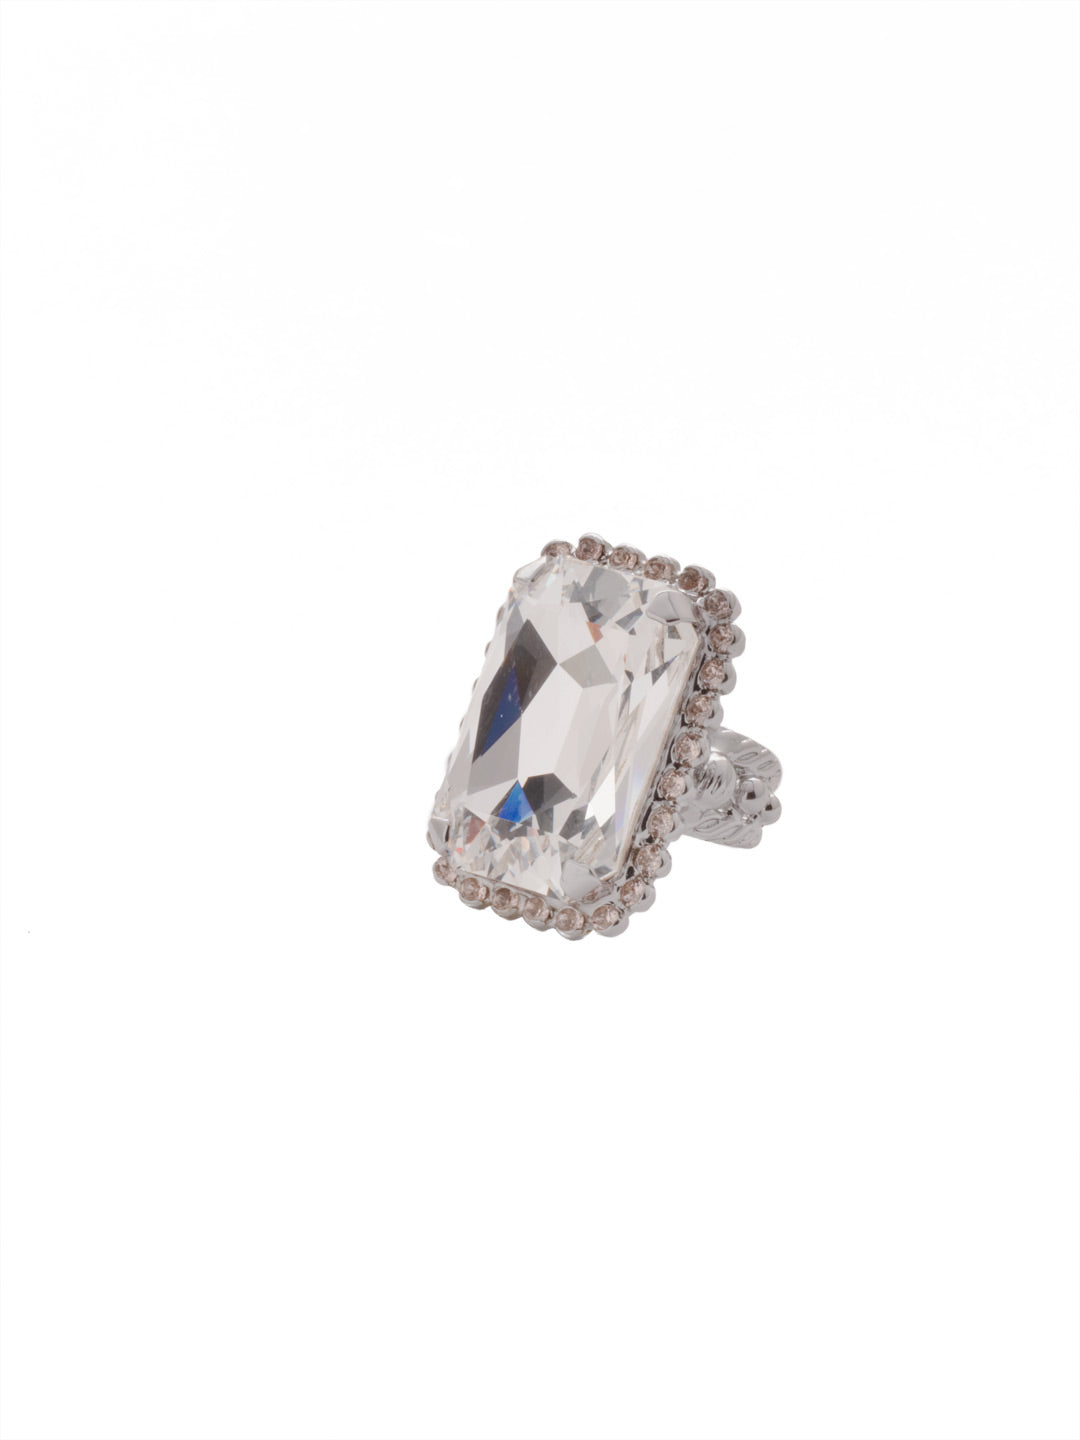 Luxurious Emerald-Cut Cocktail Ring - RBT69PDSNB